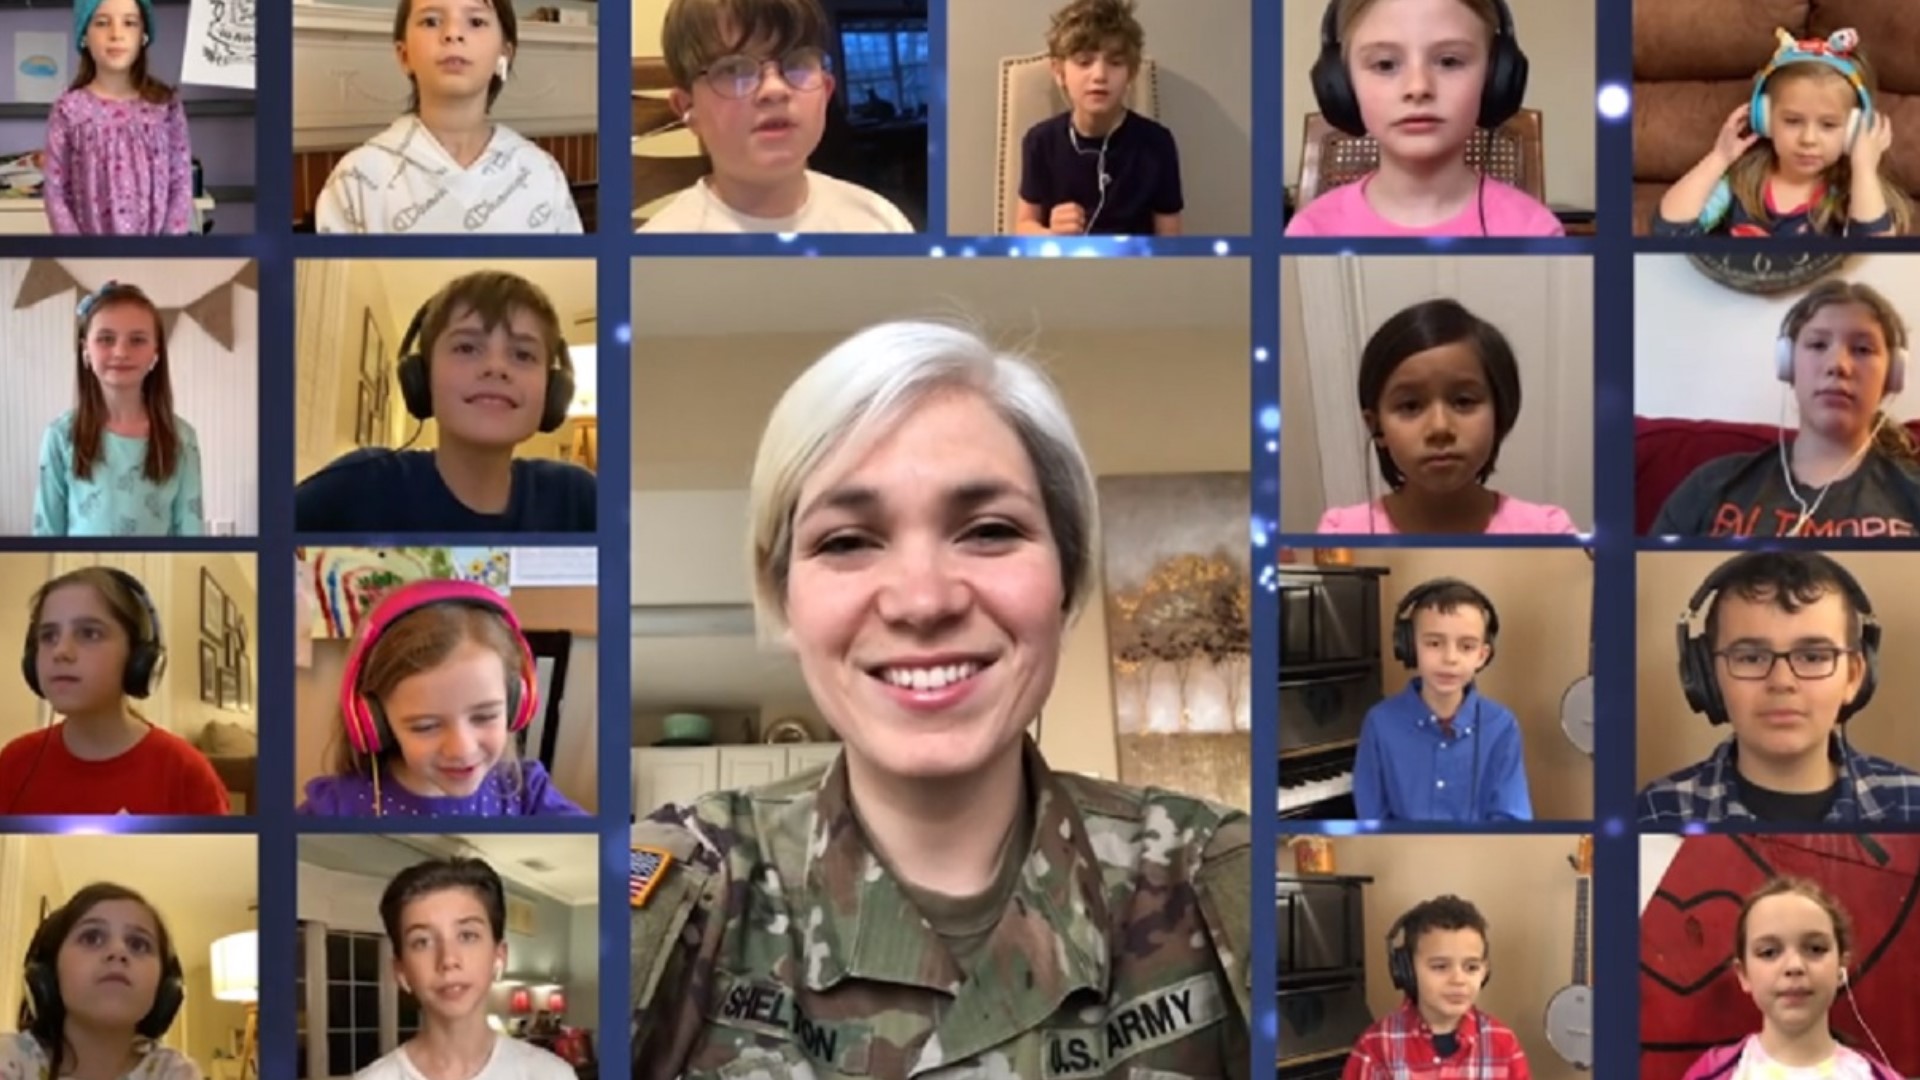 Soldier creates a sing-a-long video to help young children cope with anxiety and stress brought on by the COVID-19 pandemic. Julie 'Marie' Andrews would be proud.